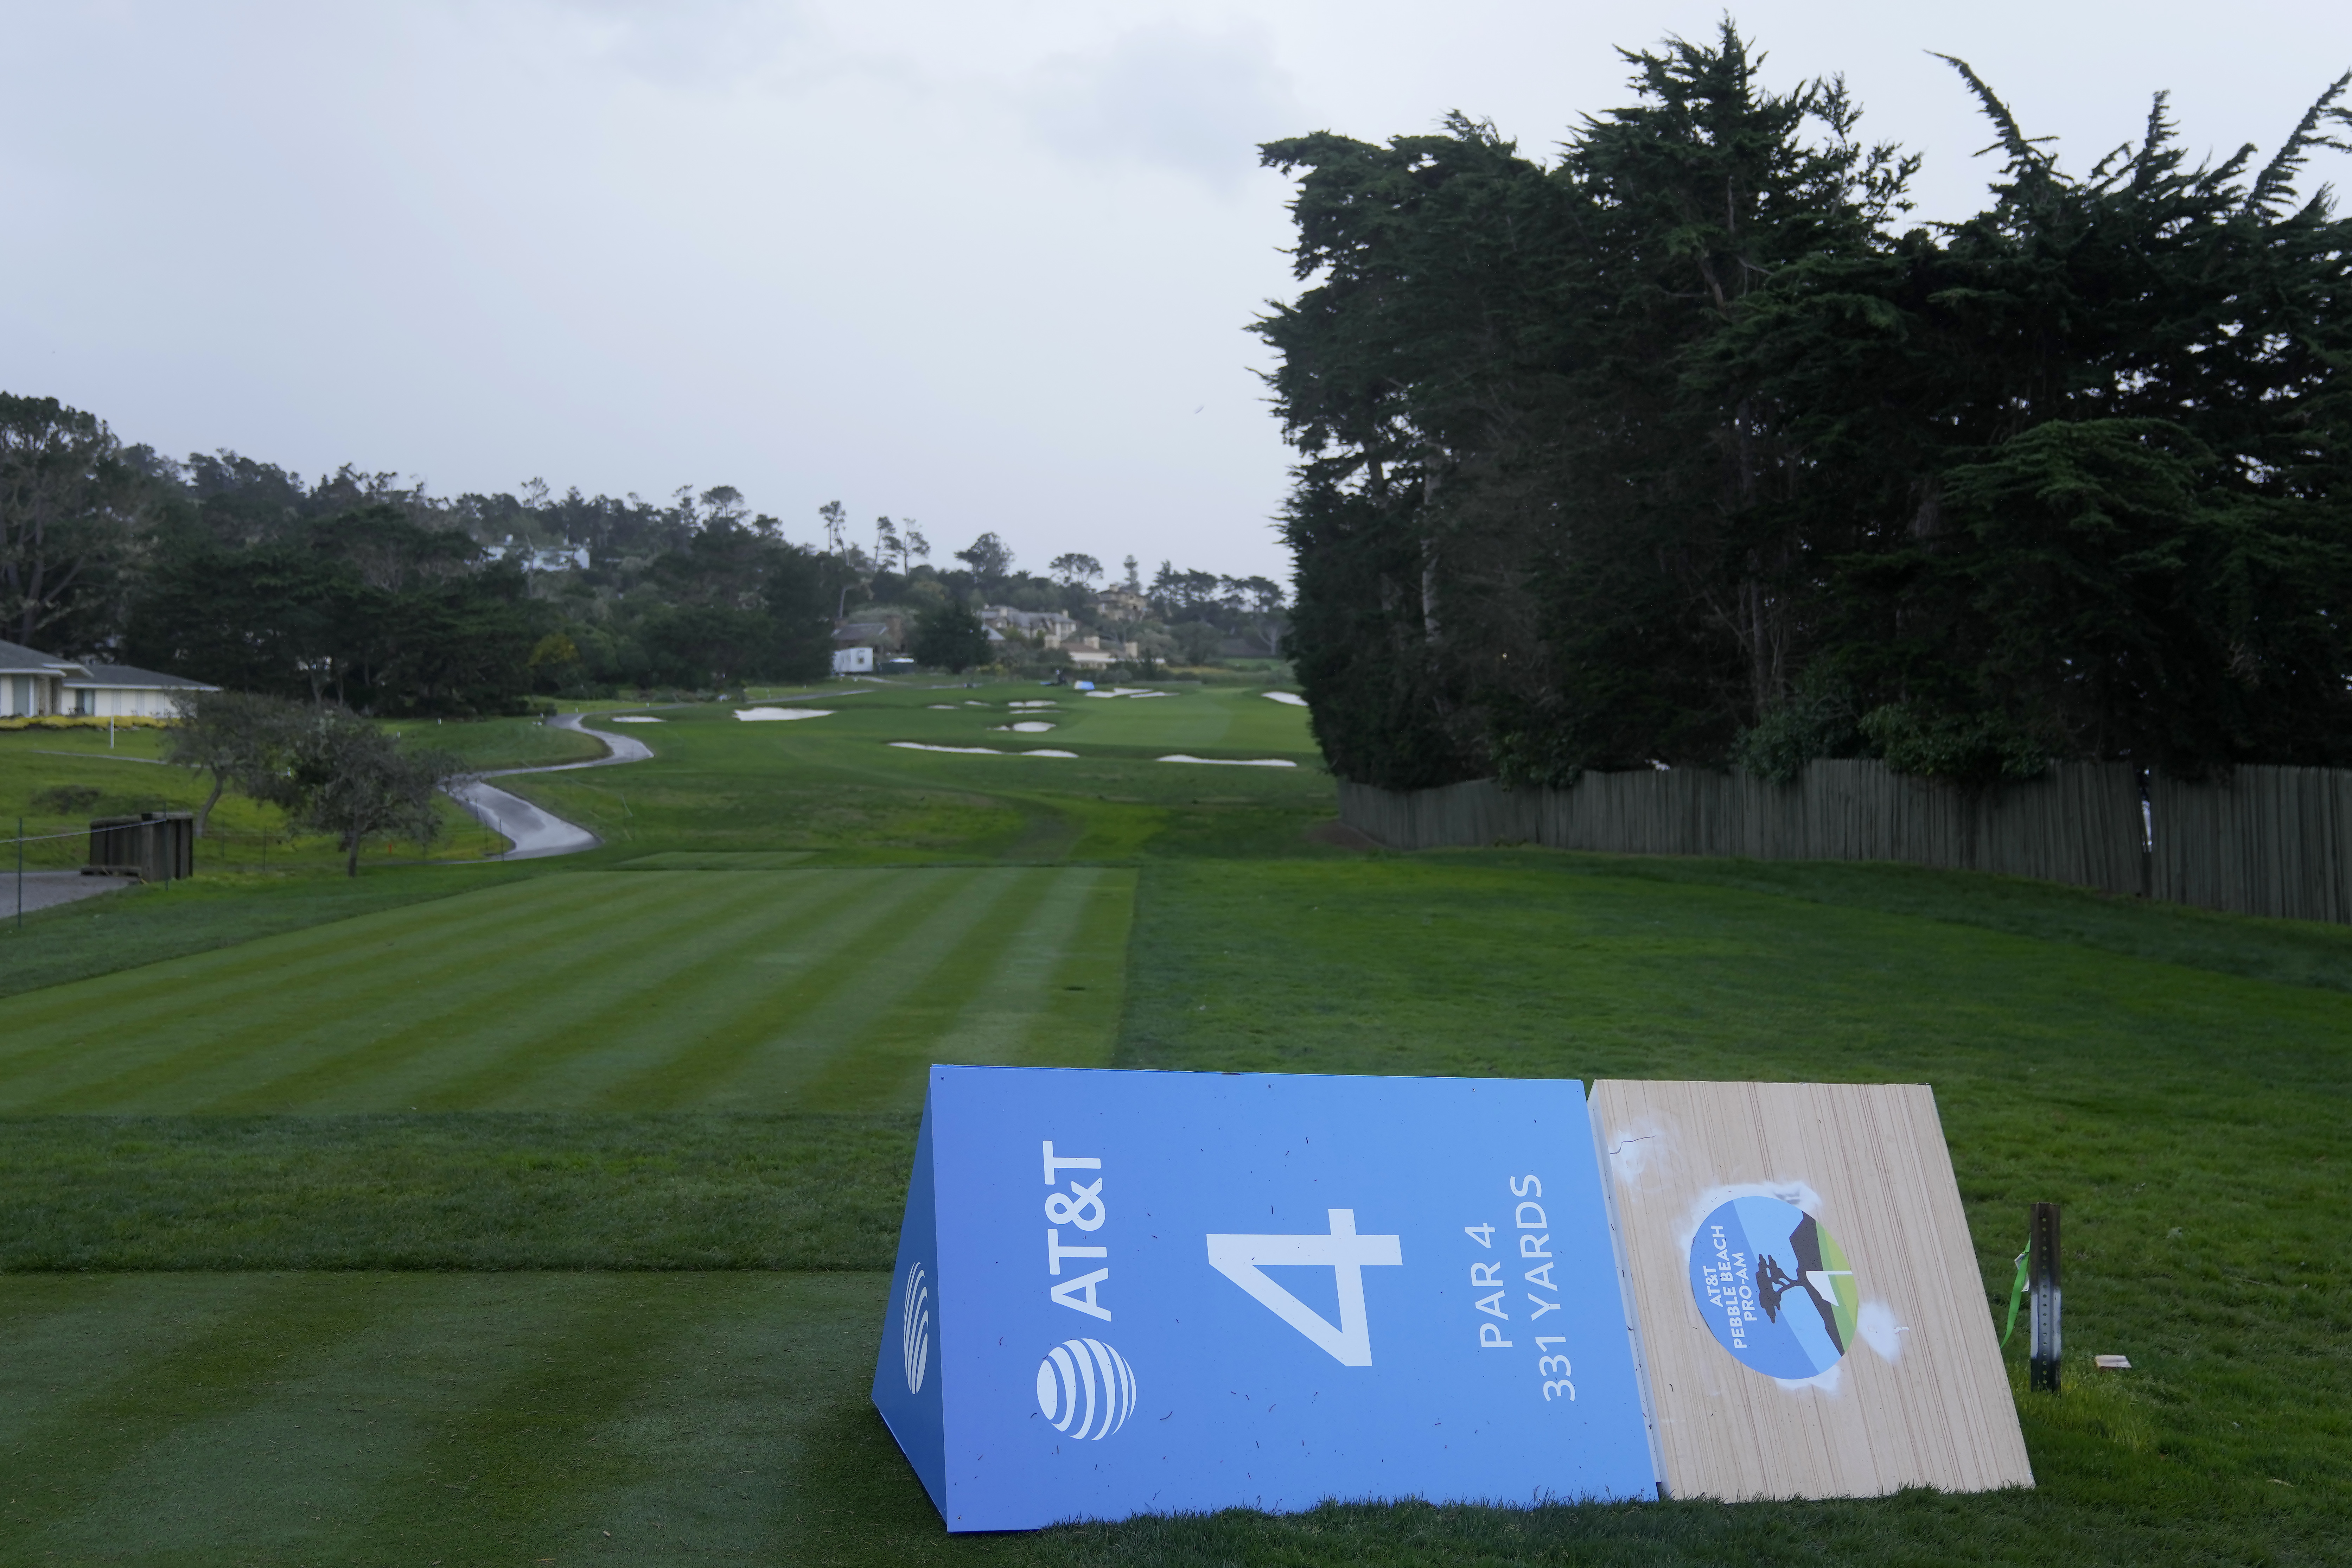 A fallen marker for the fourth tee is seen at Pebble Beach Golf Links before the final round of the AT&T Pebble Beach Pro-Am golf tournament in Pebble Beach, California, on February 4.